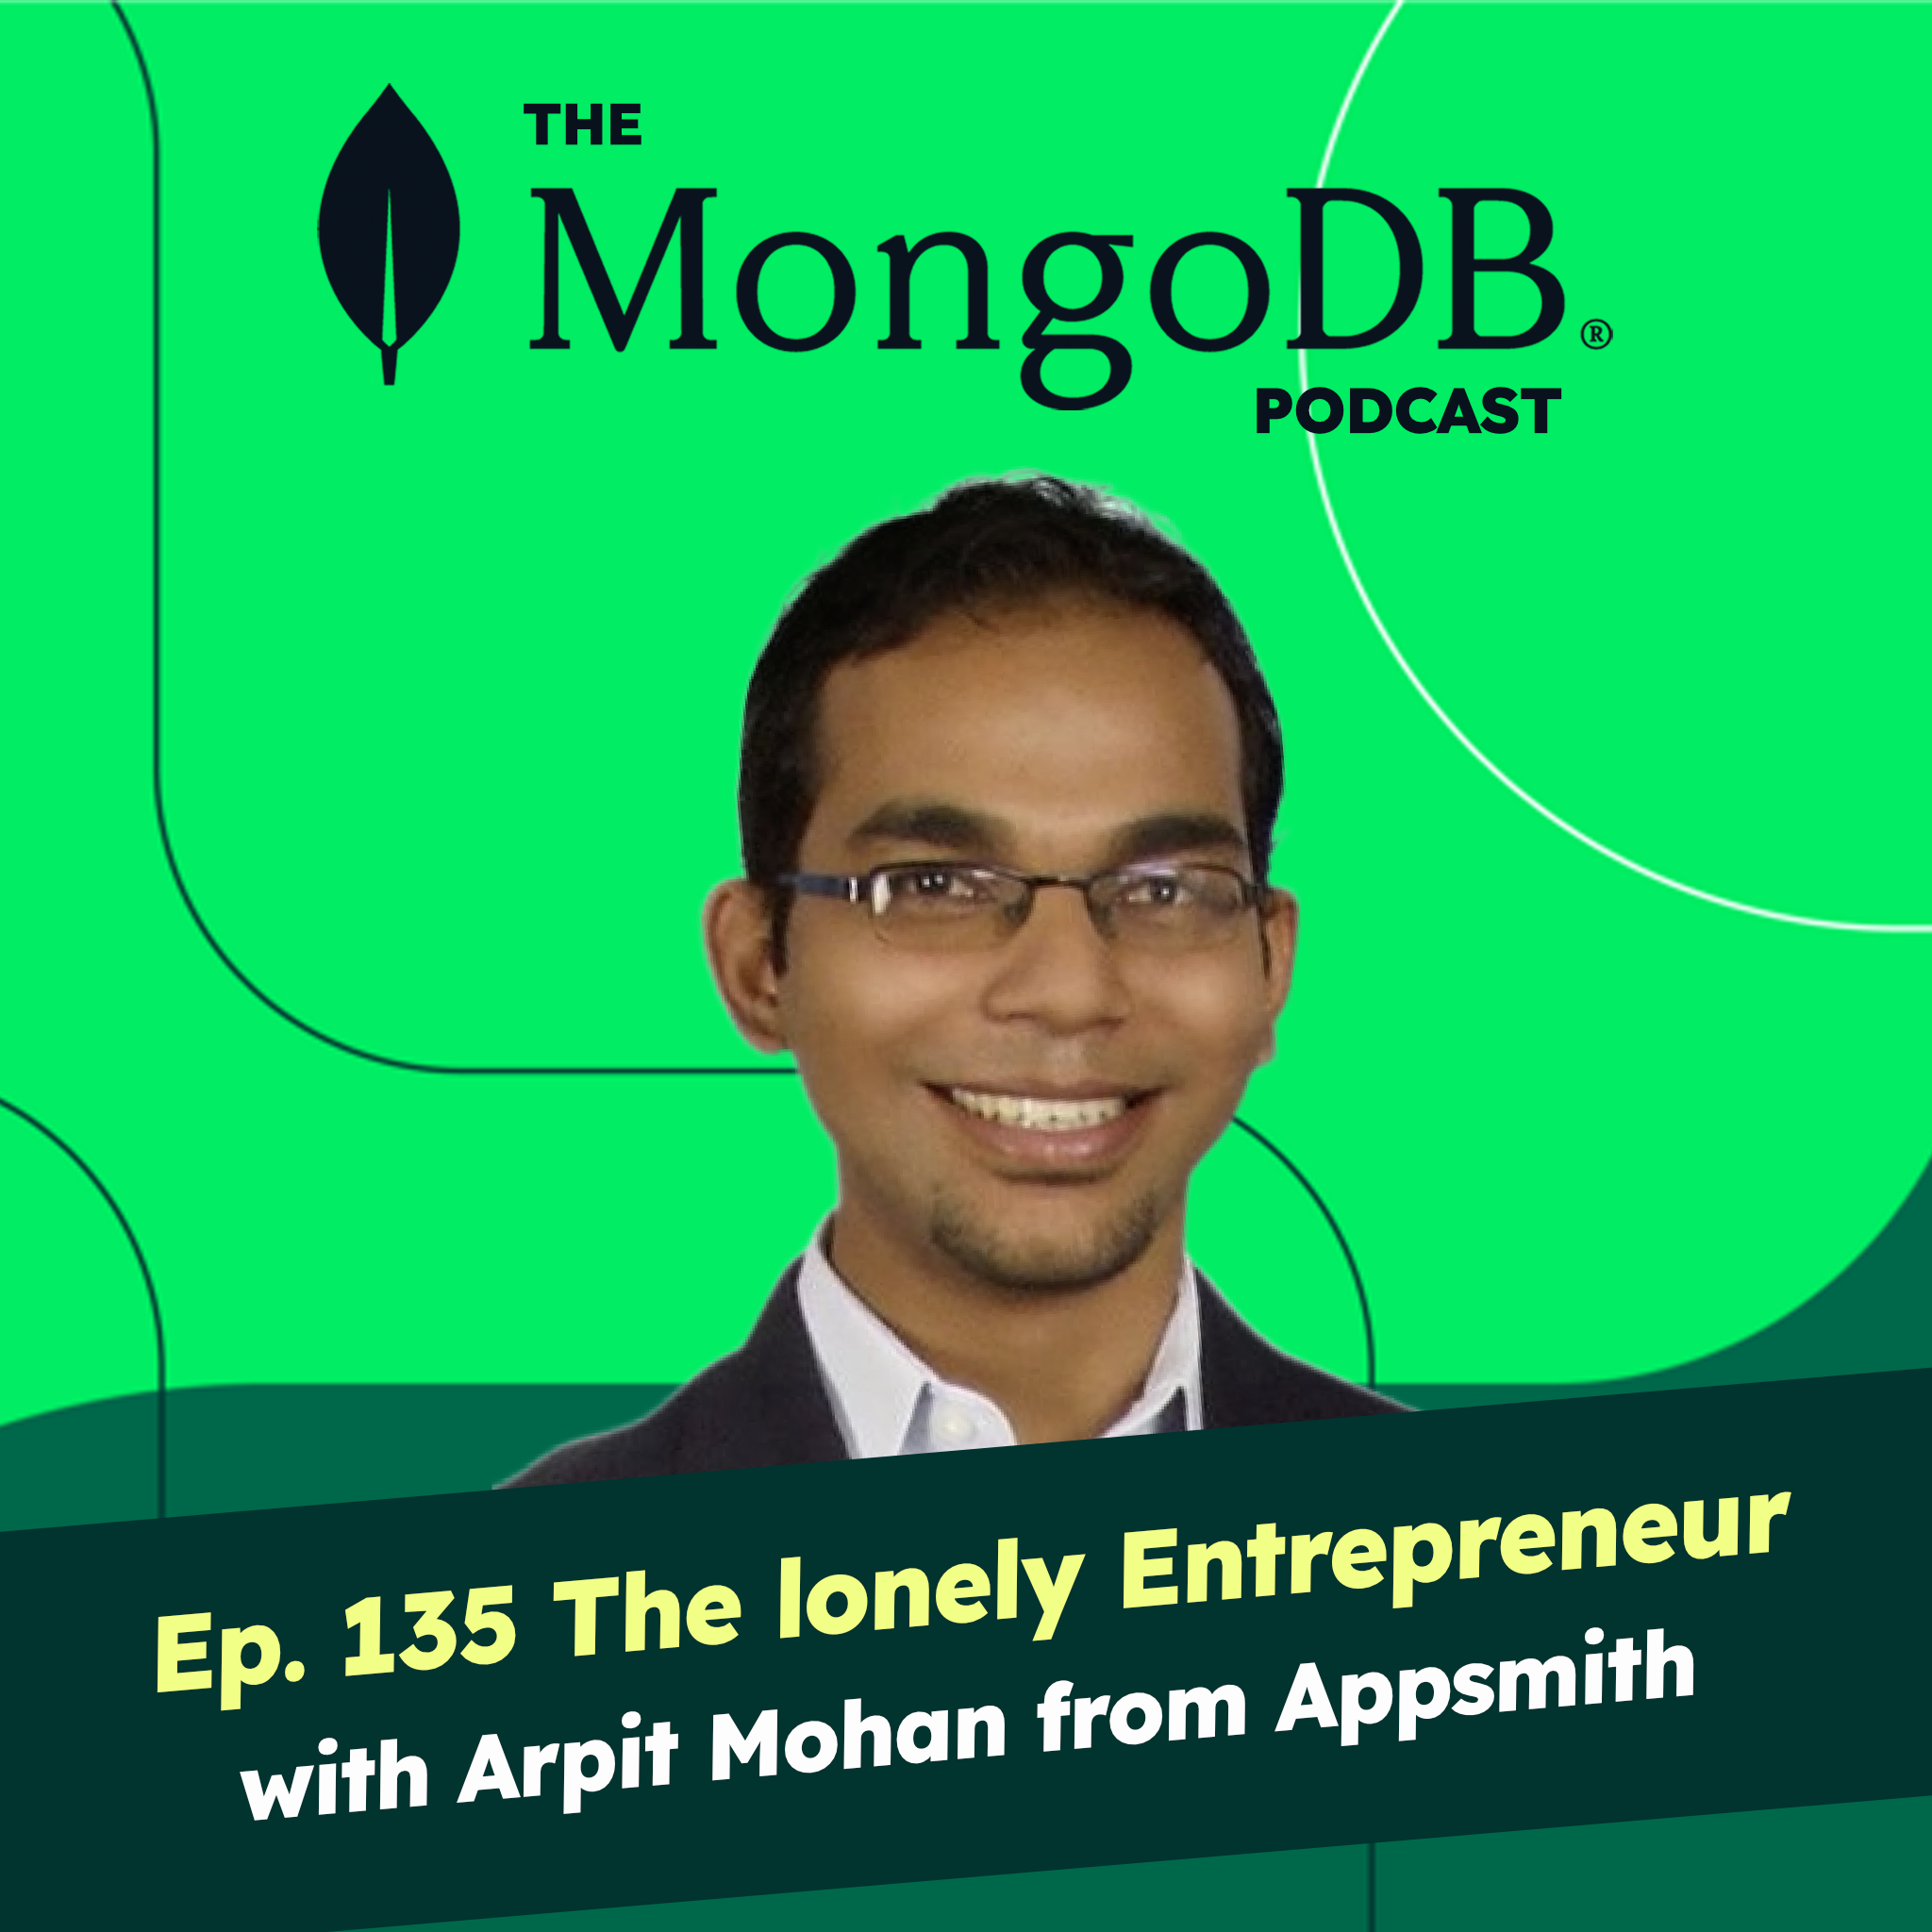 Ep 135 The lonely Entrepreneur with Arpit Mohan from Appsmith